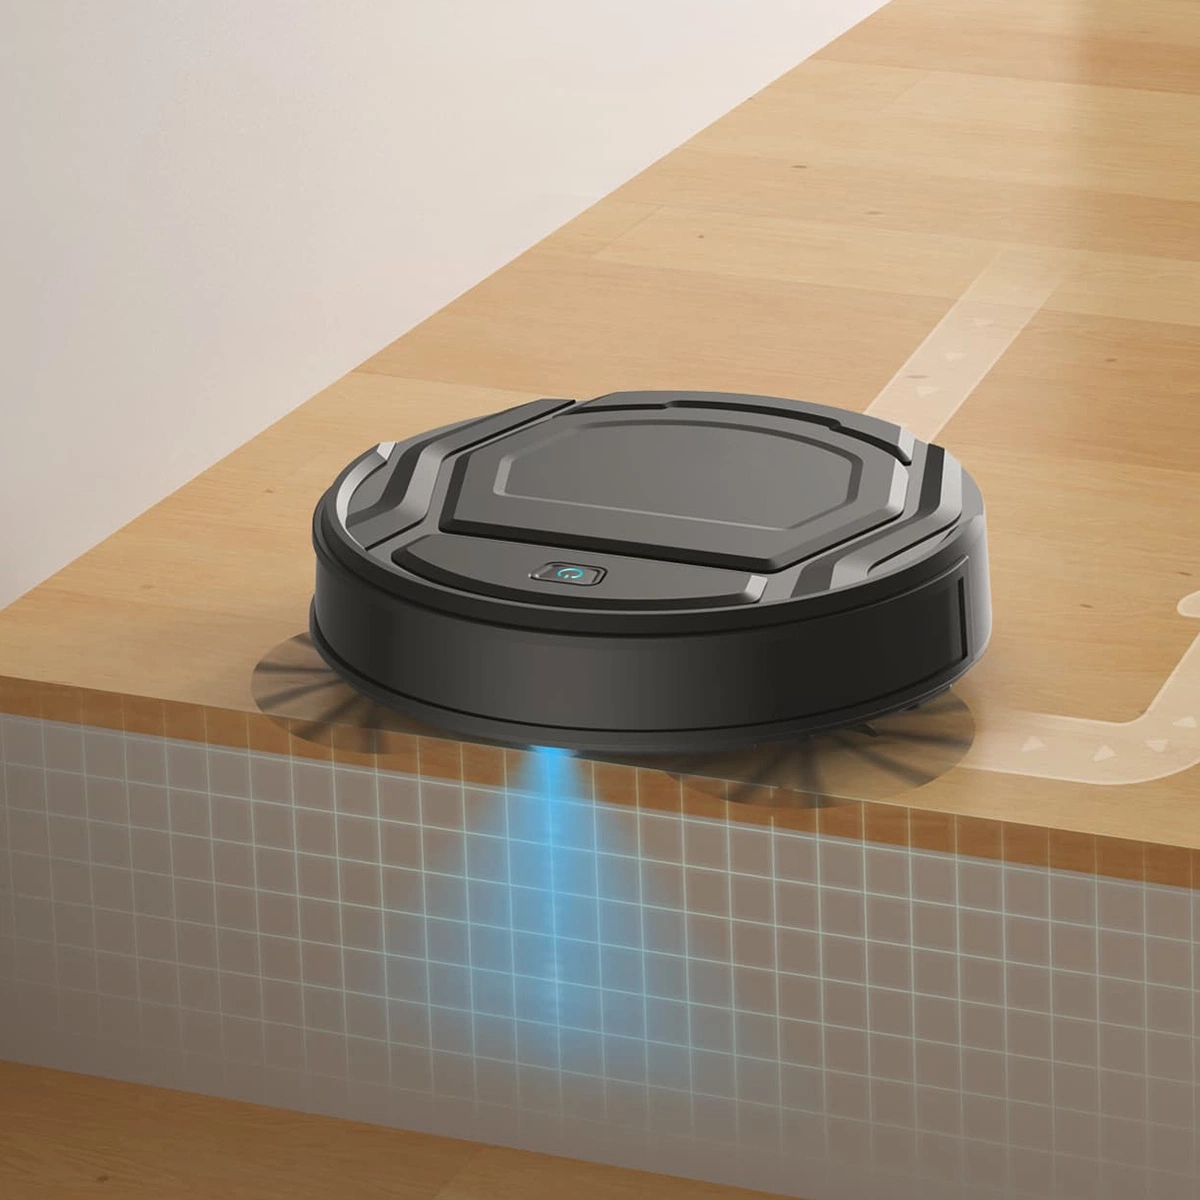 Mop Combo WiFi/APP/Alexa Control 2000PA Strong Suction 2 in 1 Mopping Robotic Vacuum Cleaner